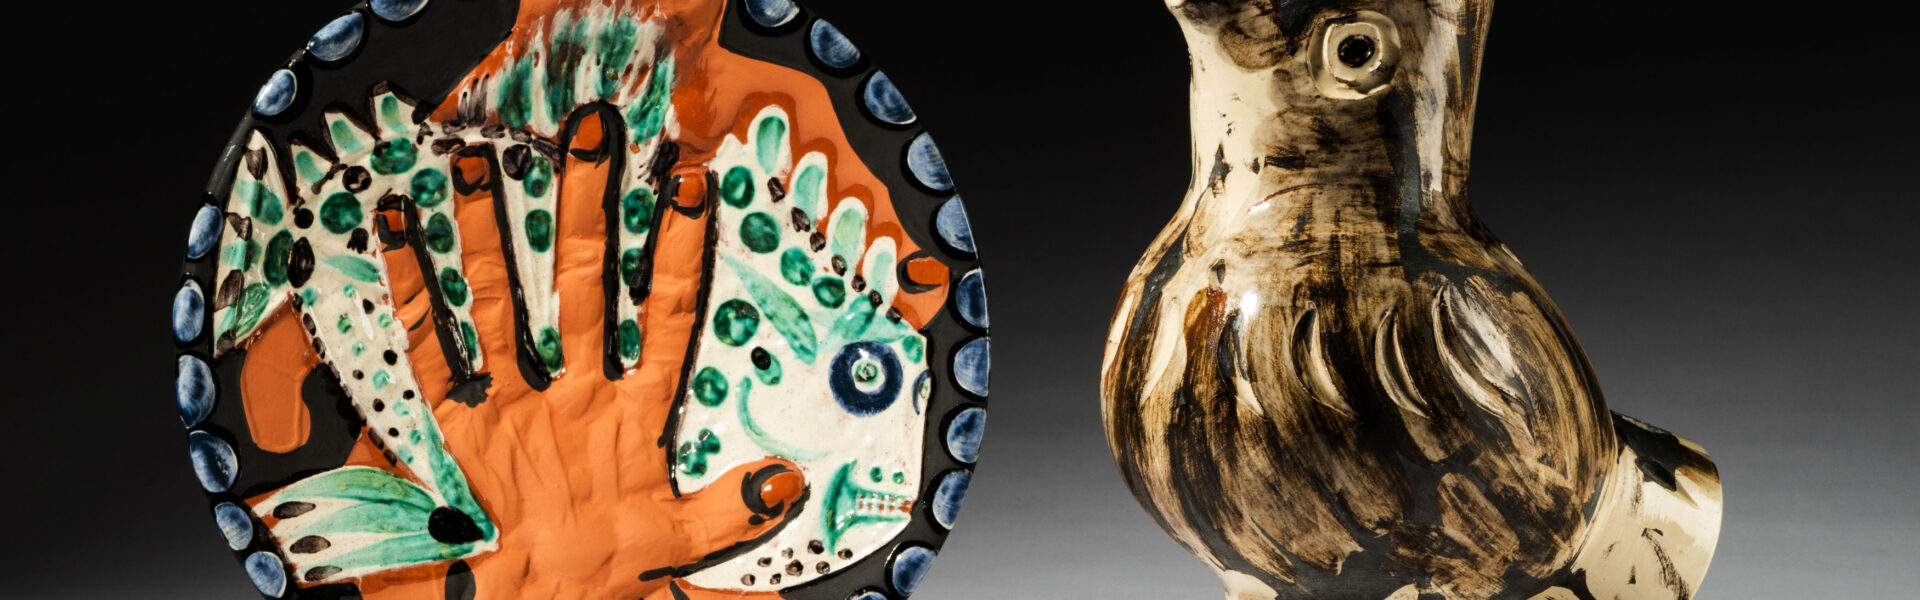 Abell Auction Co Holiday Jewelry And Design Auction, Madoura Pottery Collection By Pablo Picasso.